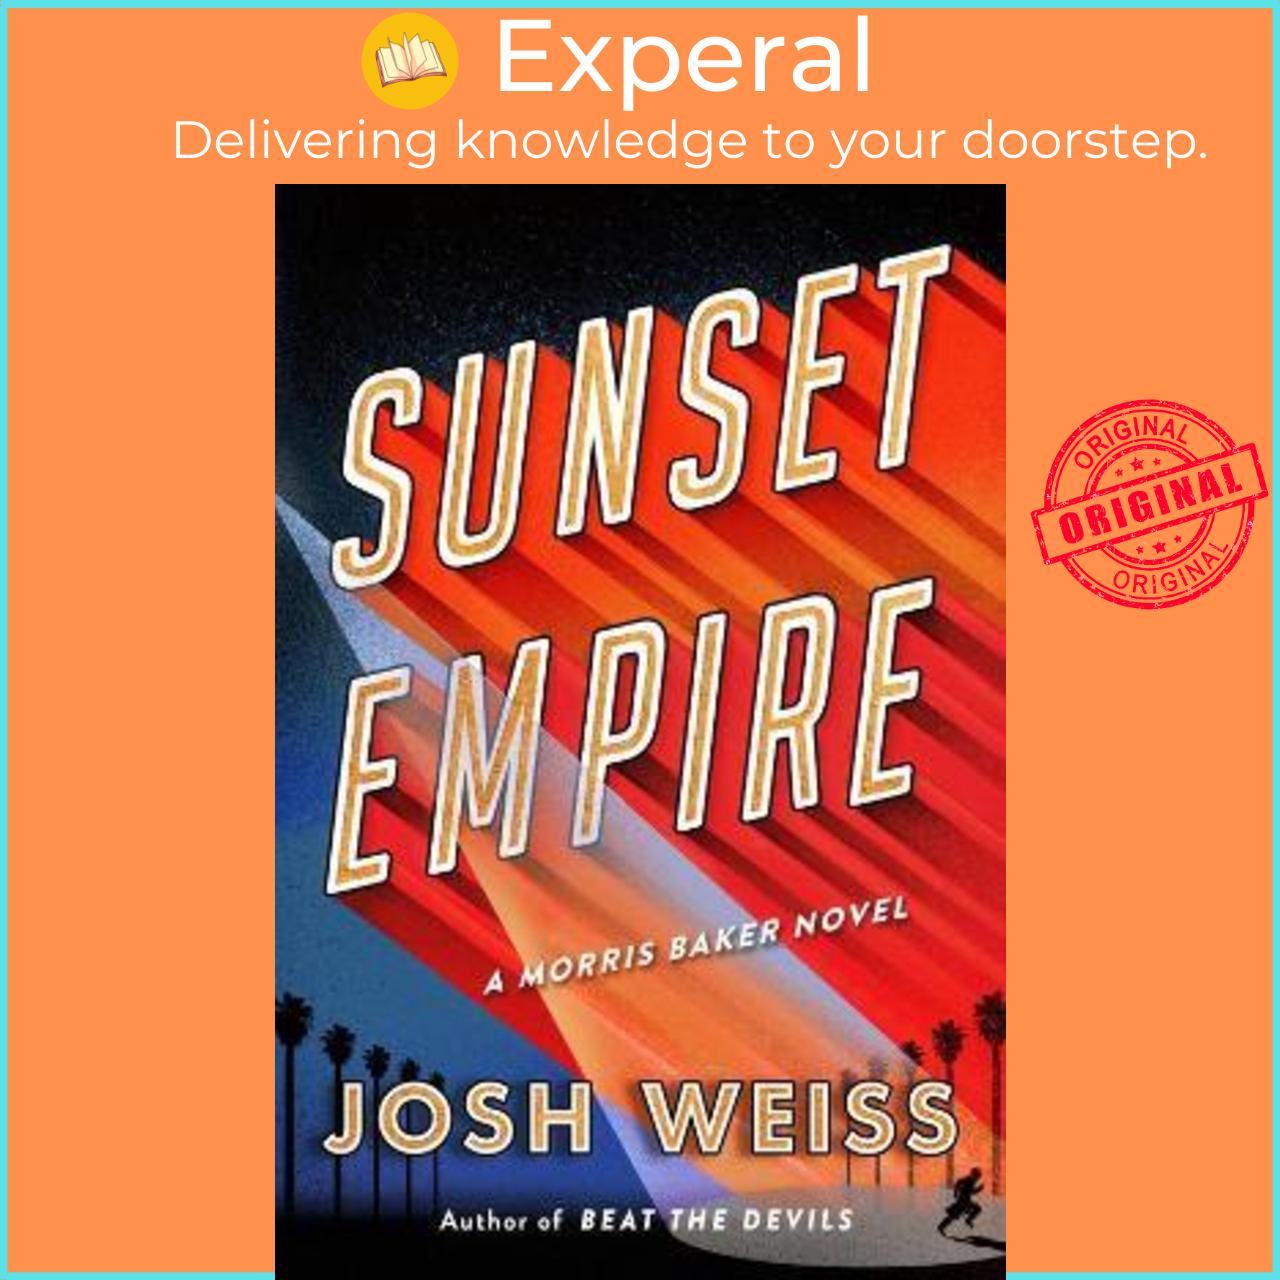 Sách - Sunset Empire by Josh Weiss (US edition, hardcover)